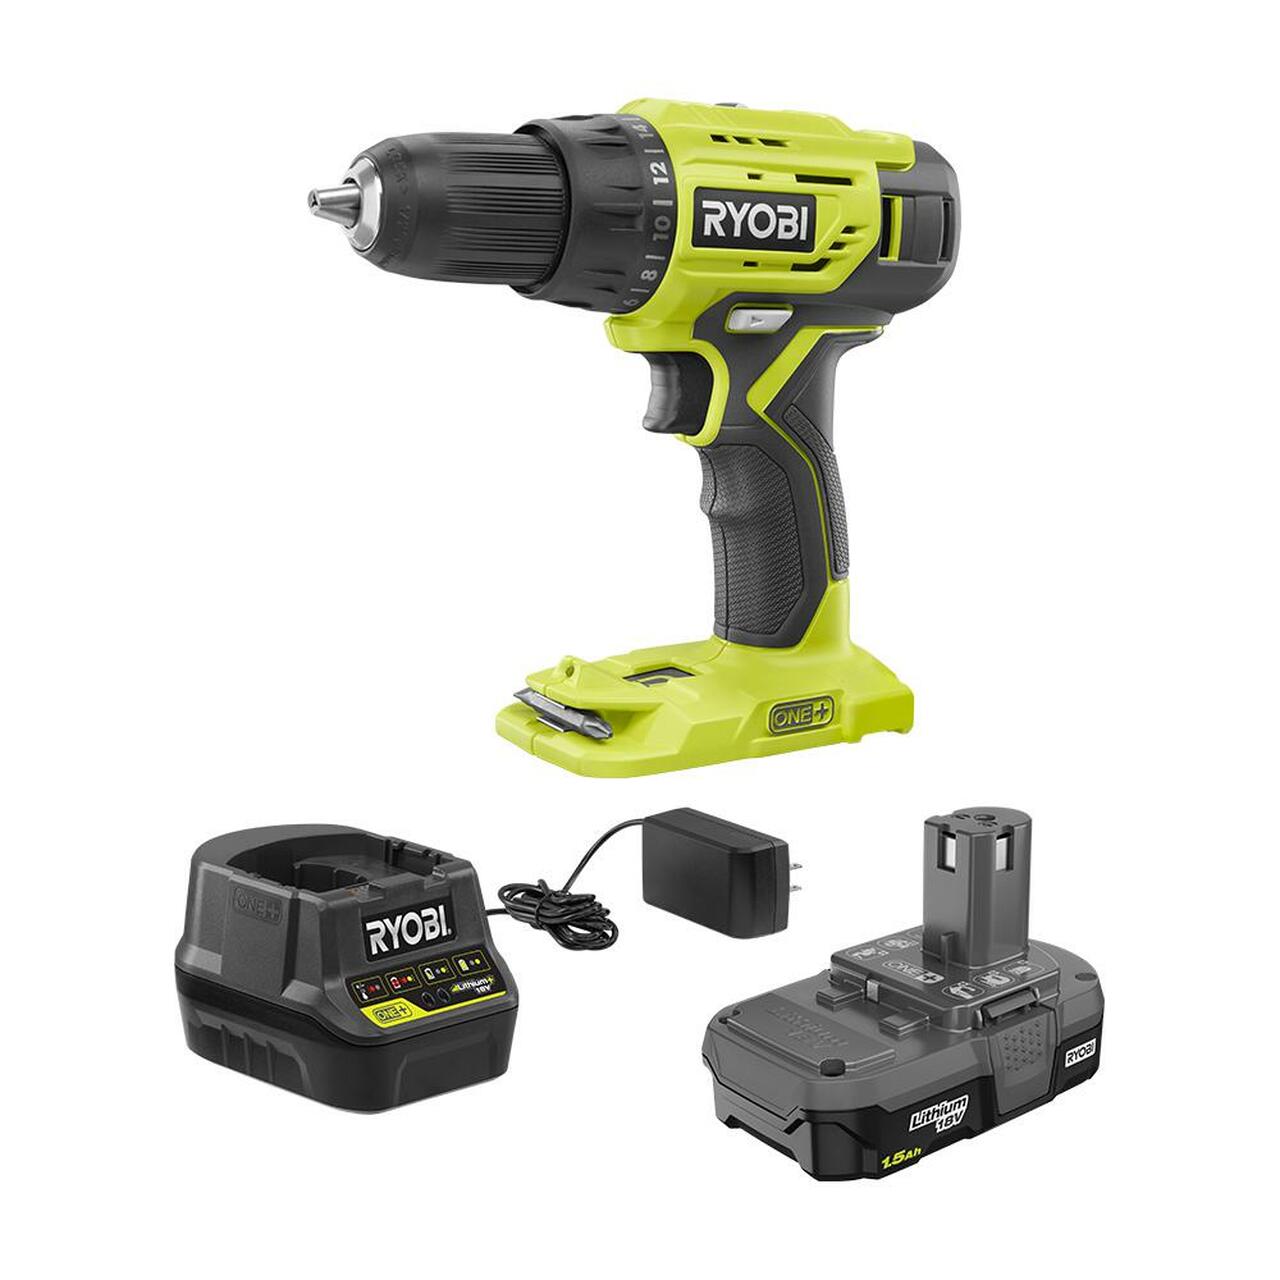 Ryobi P215K ONE+ 1/2" 18V Drill Driver With Battery and Charger $24.99